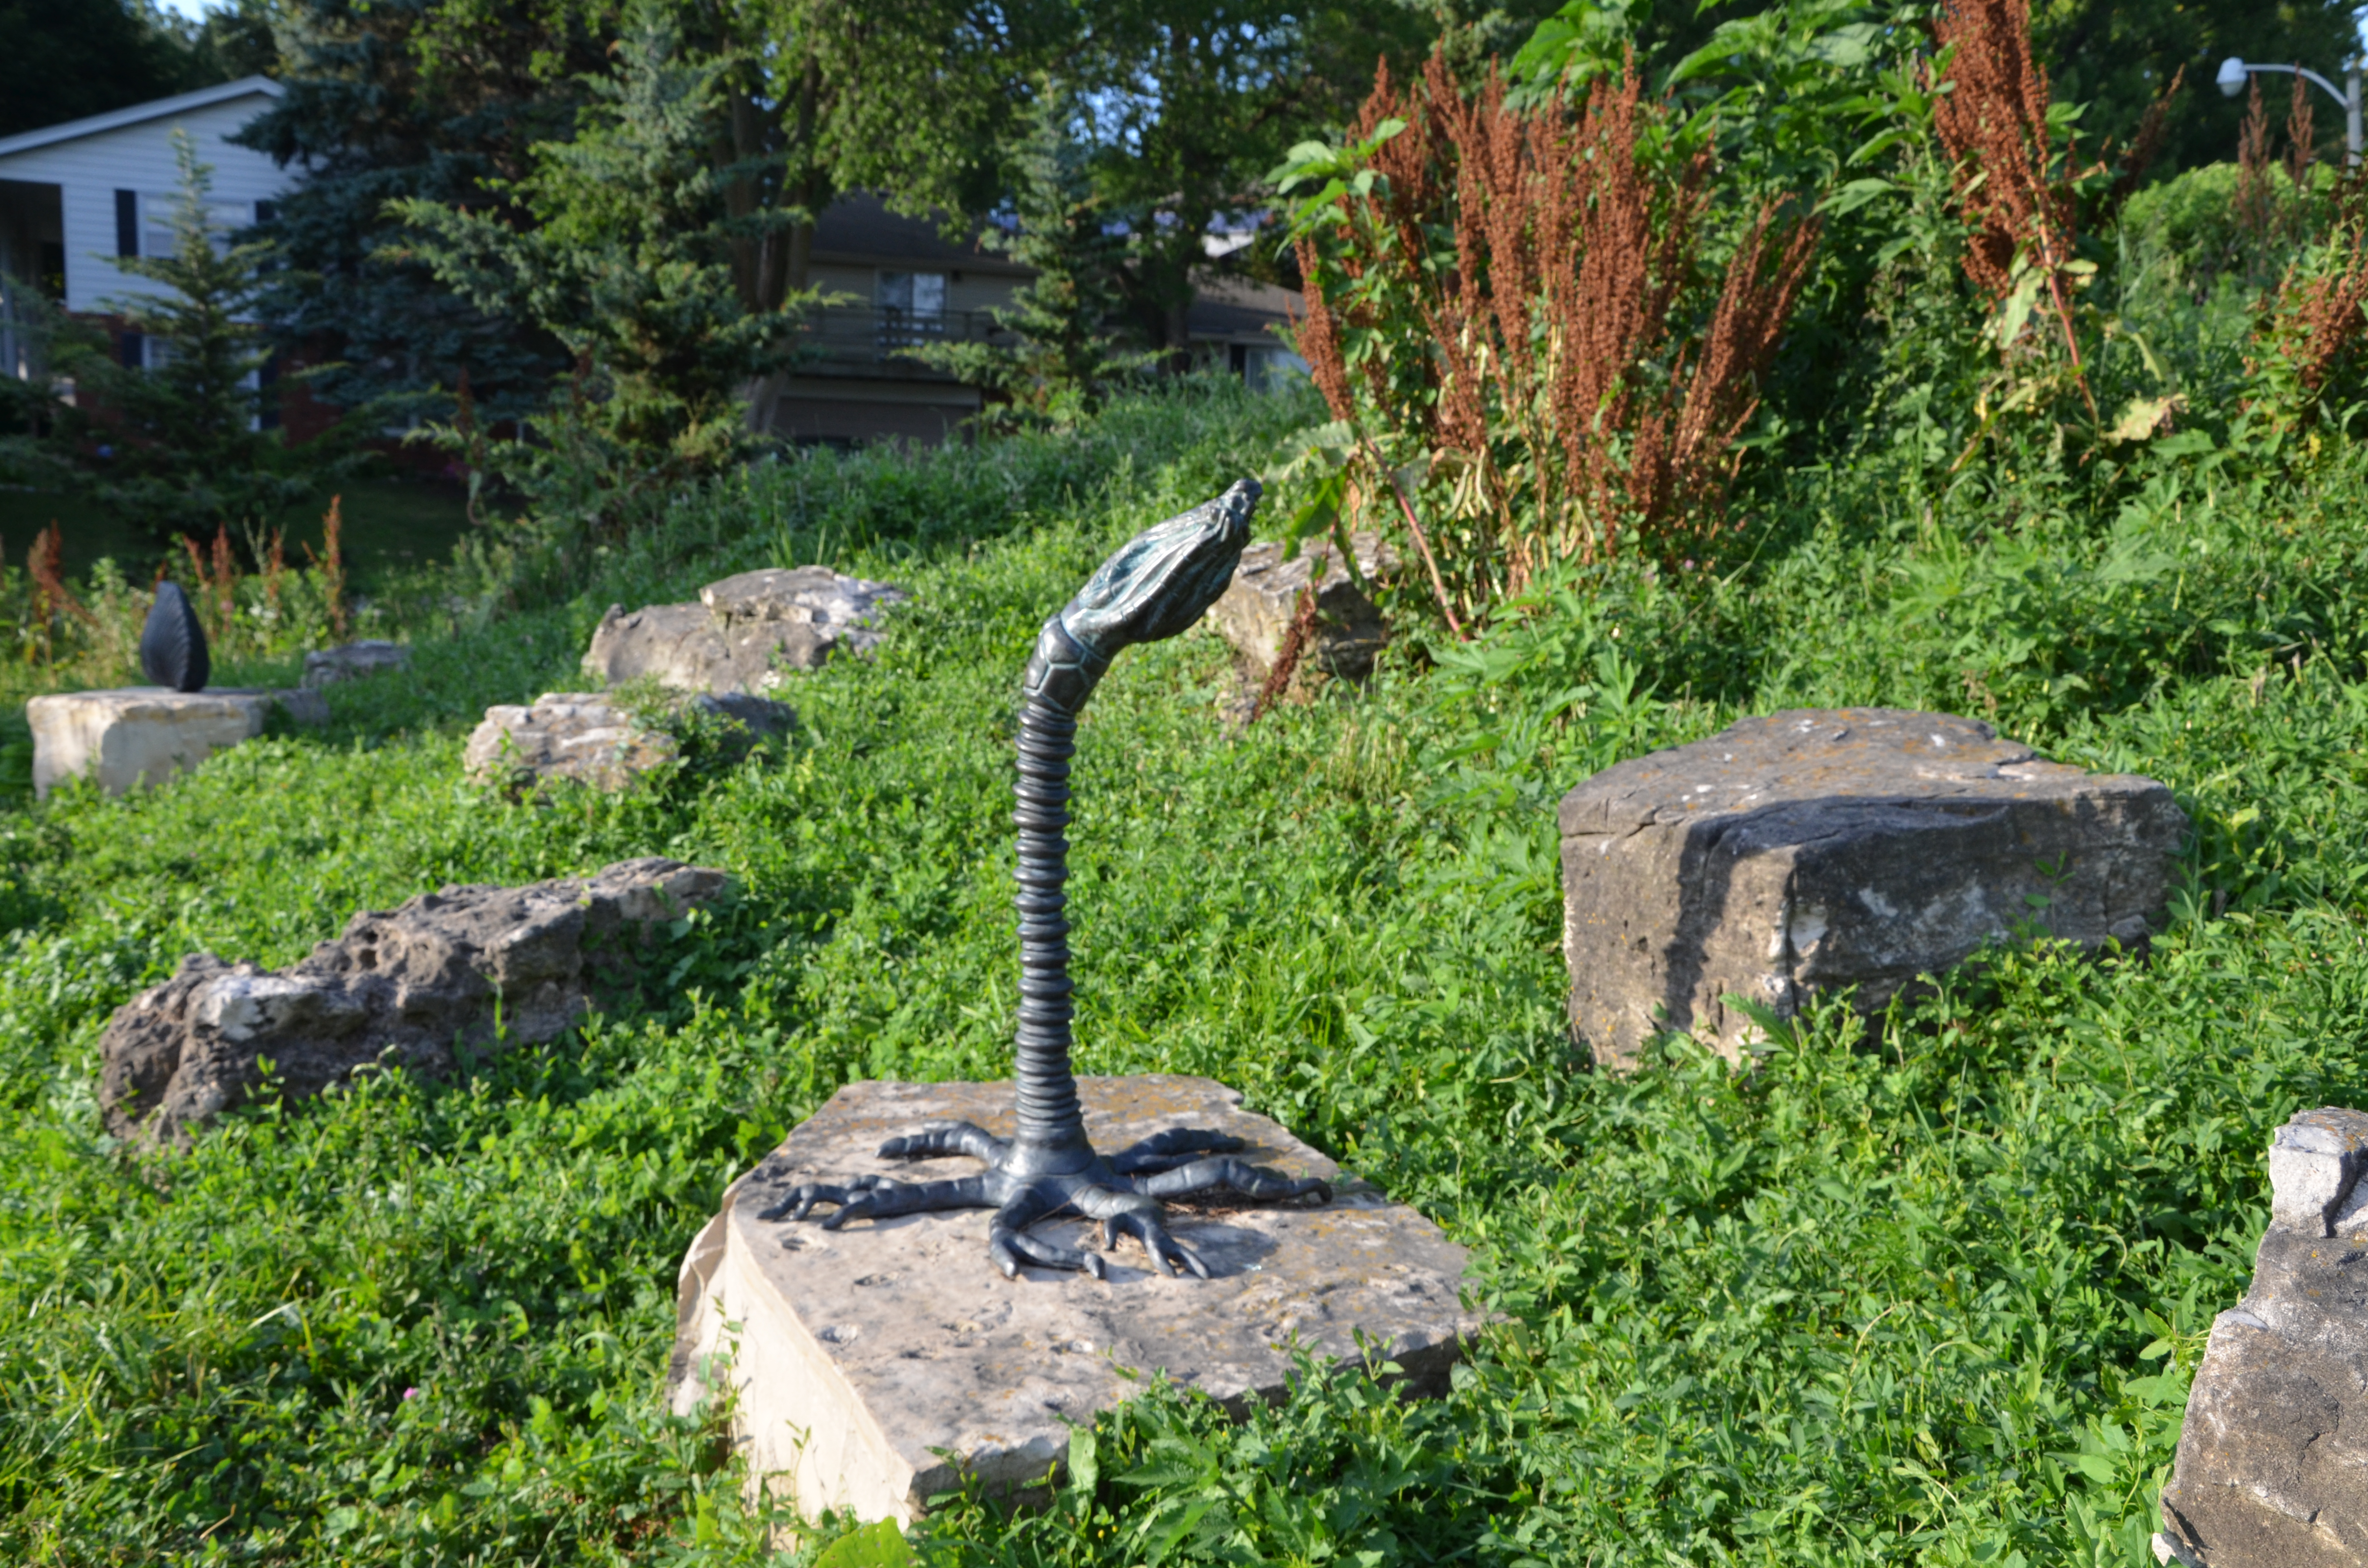 Close up of one of seven bronze sculptures (a crinoid) of Silurian sea life  by artist Laura Priebe at Hartung Park located along the Menomonee River Parkway between Burleigh Street and Capitol Drive. Hartung Park is is a joint City of Milwaukee and City of Wauwatosa Park Carbonate rock of the Racine Formationwas quarried from this site from 1910 to 1961. The quarry was over 100 feet deep and approximately 3 millin tons of rock was quarried here. The quarry became a dump in the 1960's and in 2005 was converted into a park.